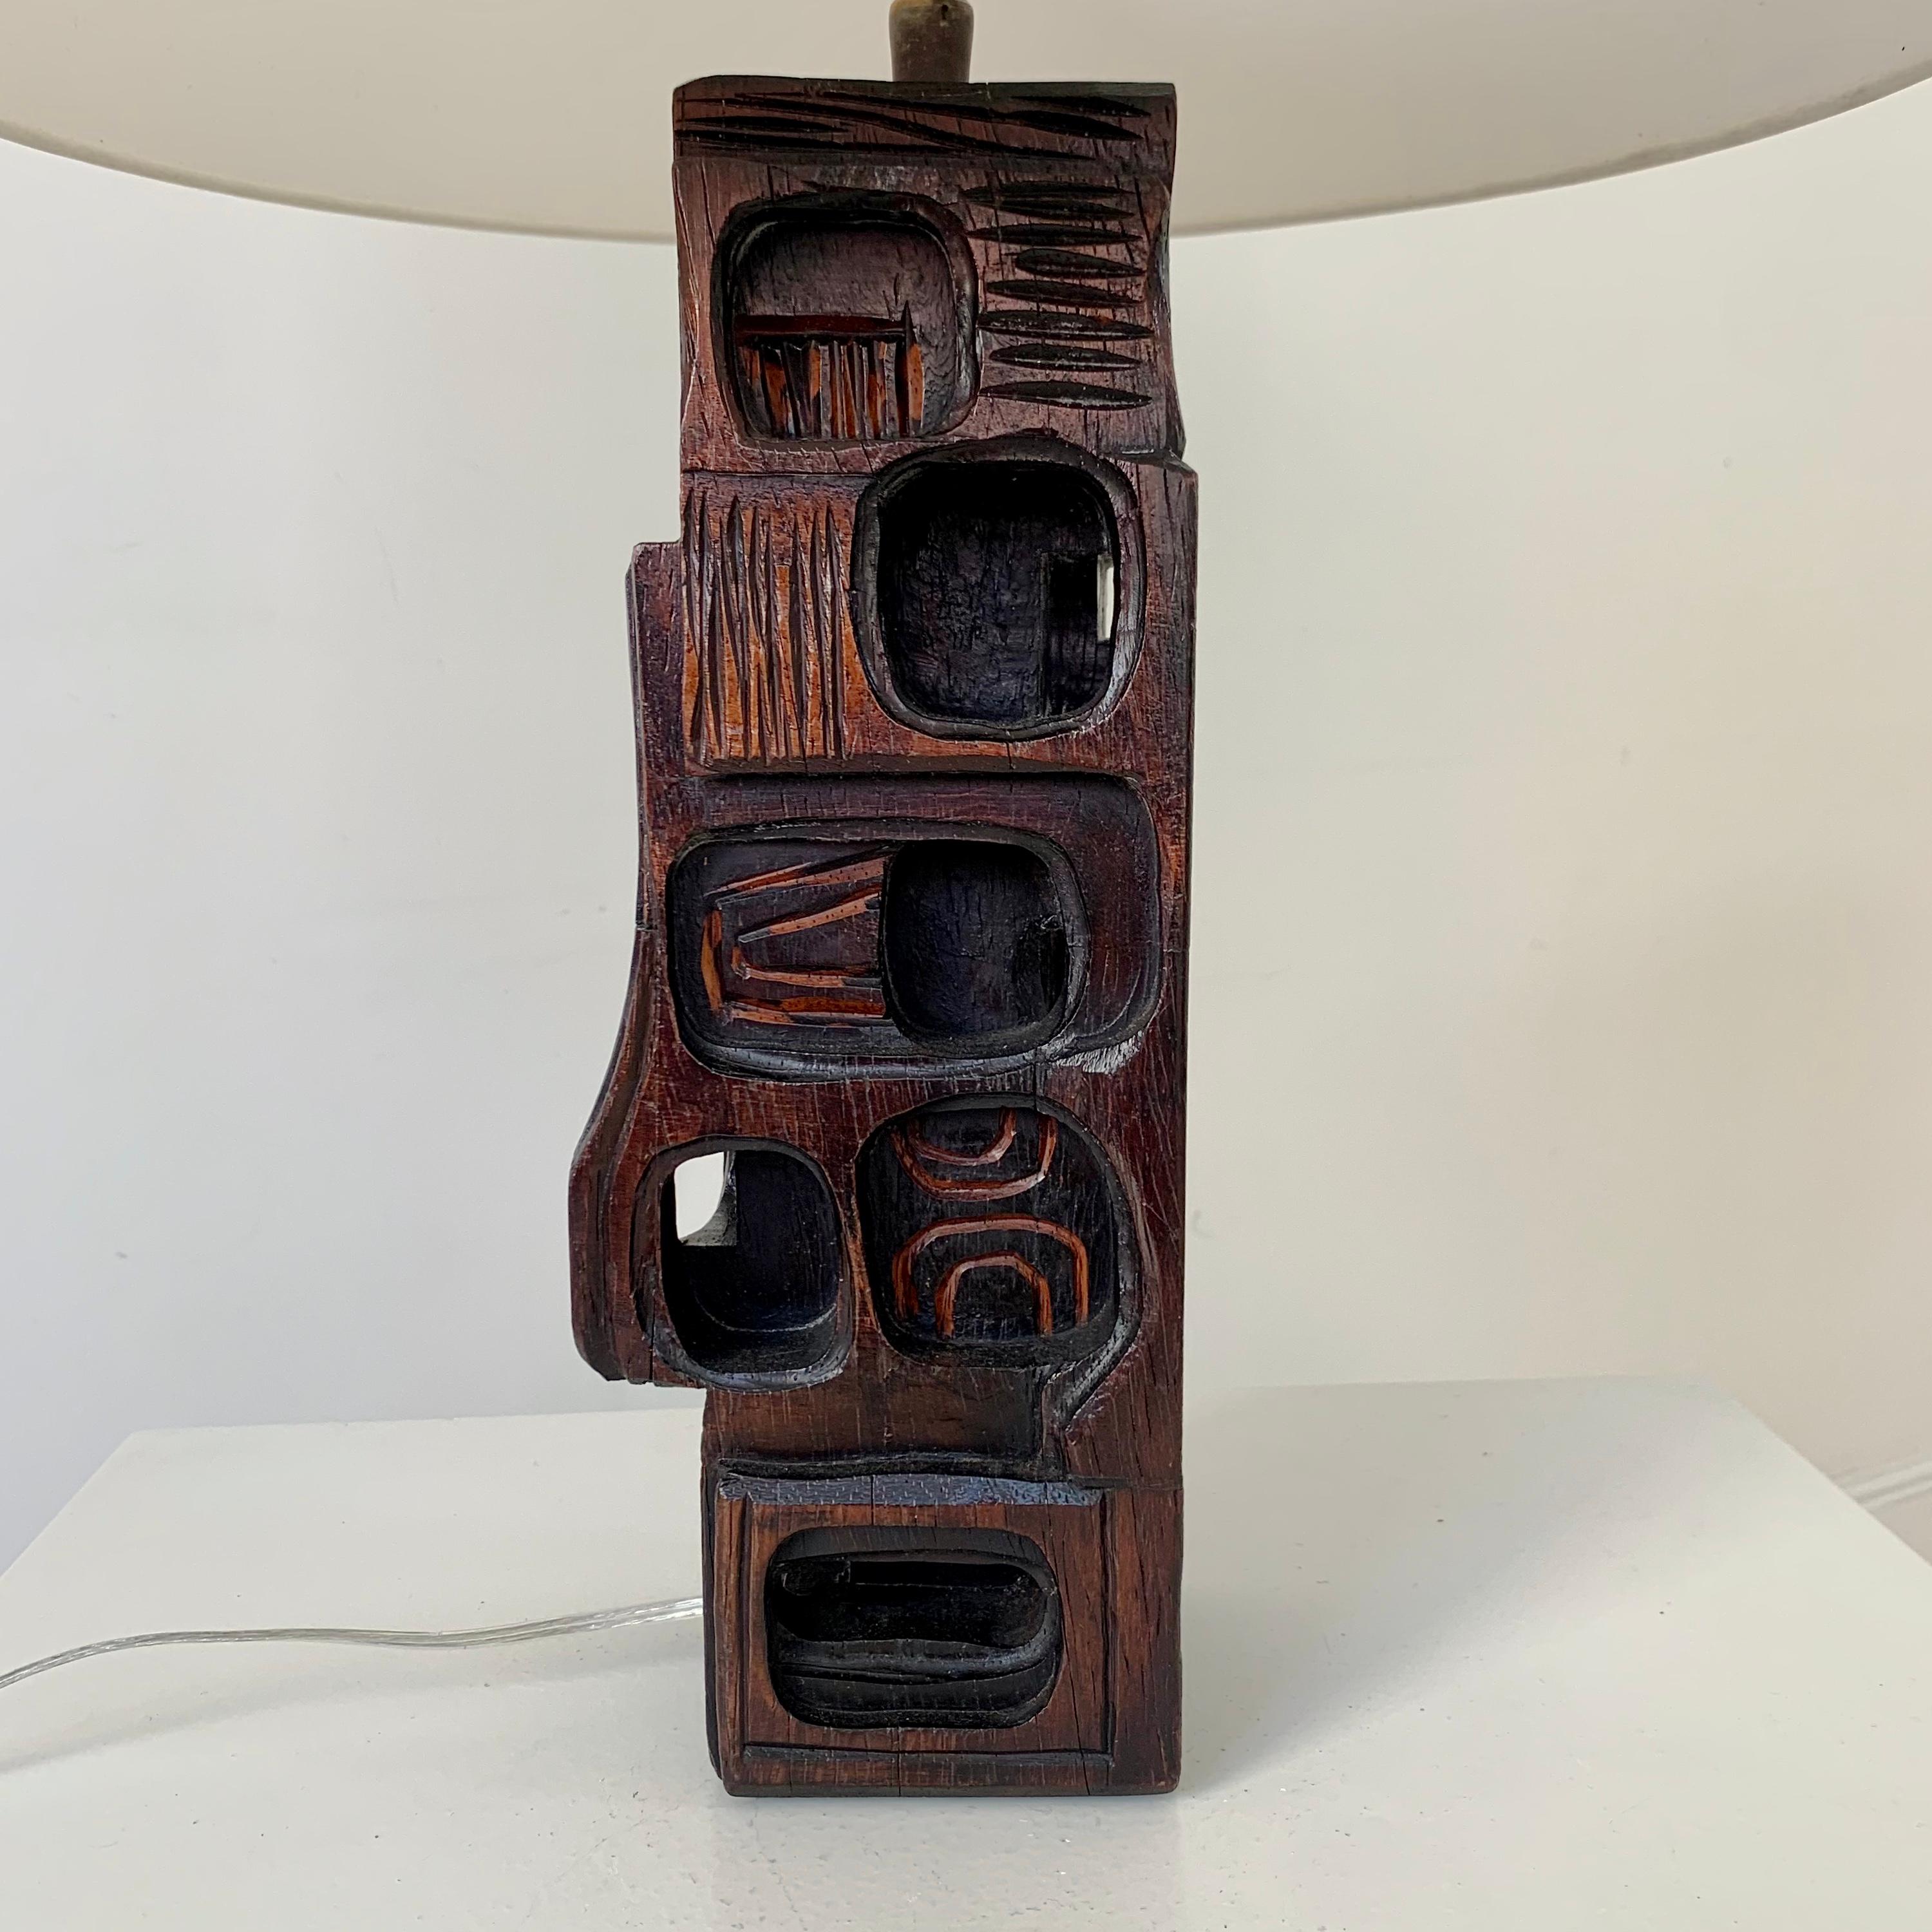 Wood Sculptural Hand Carved Table Lamp by Gianni Pinna, c.1970, Italy.